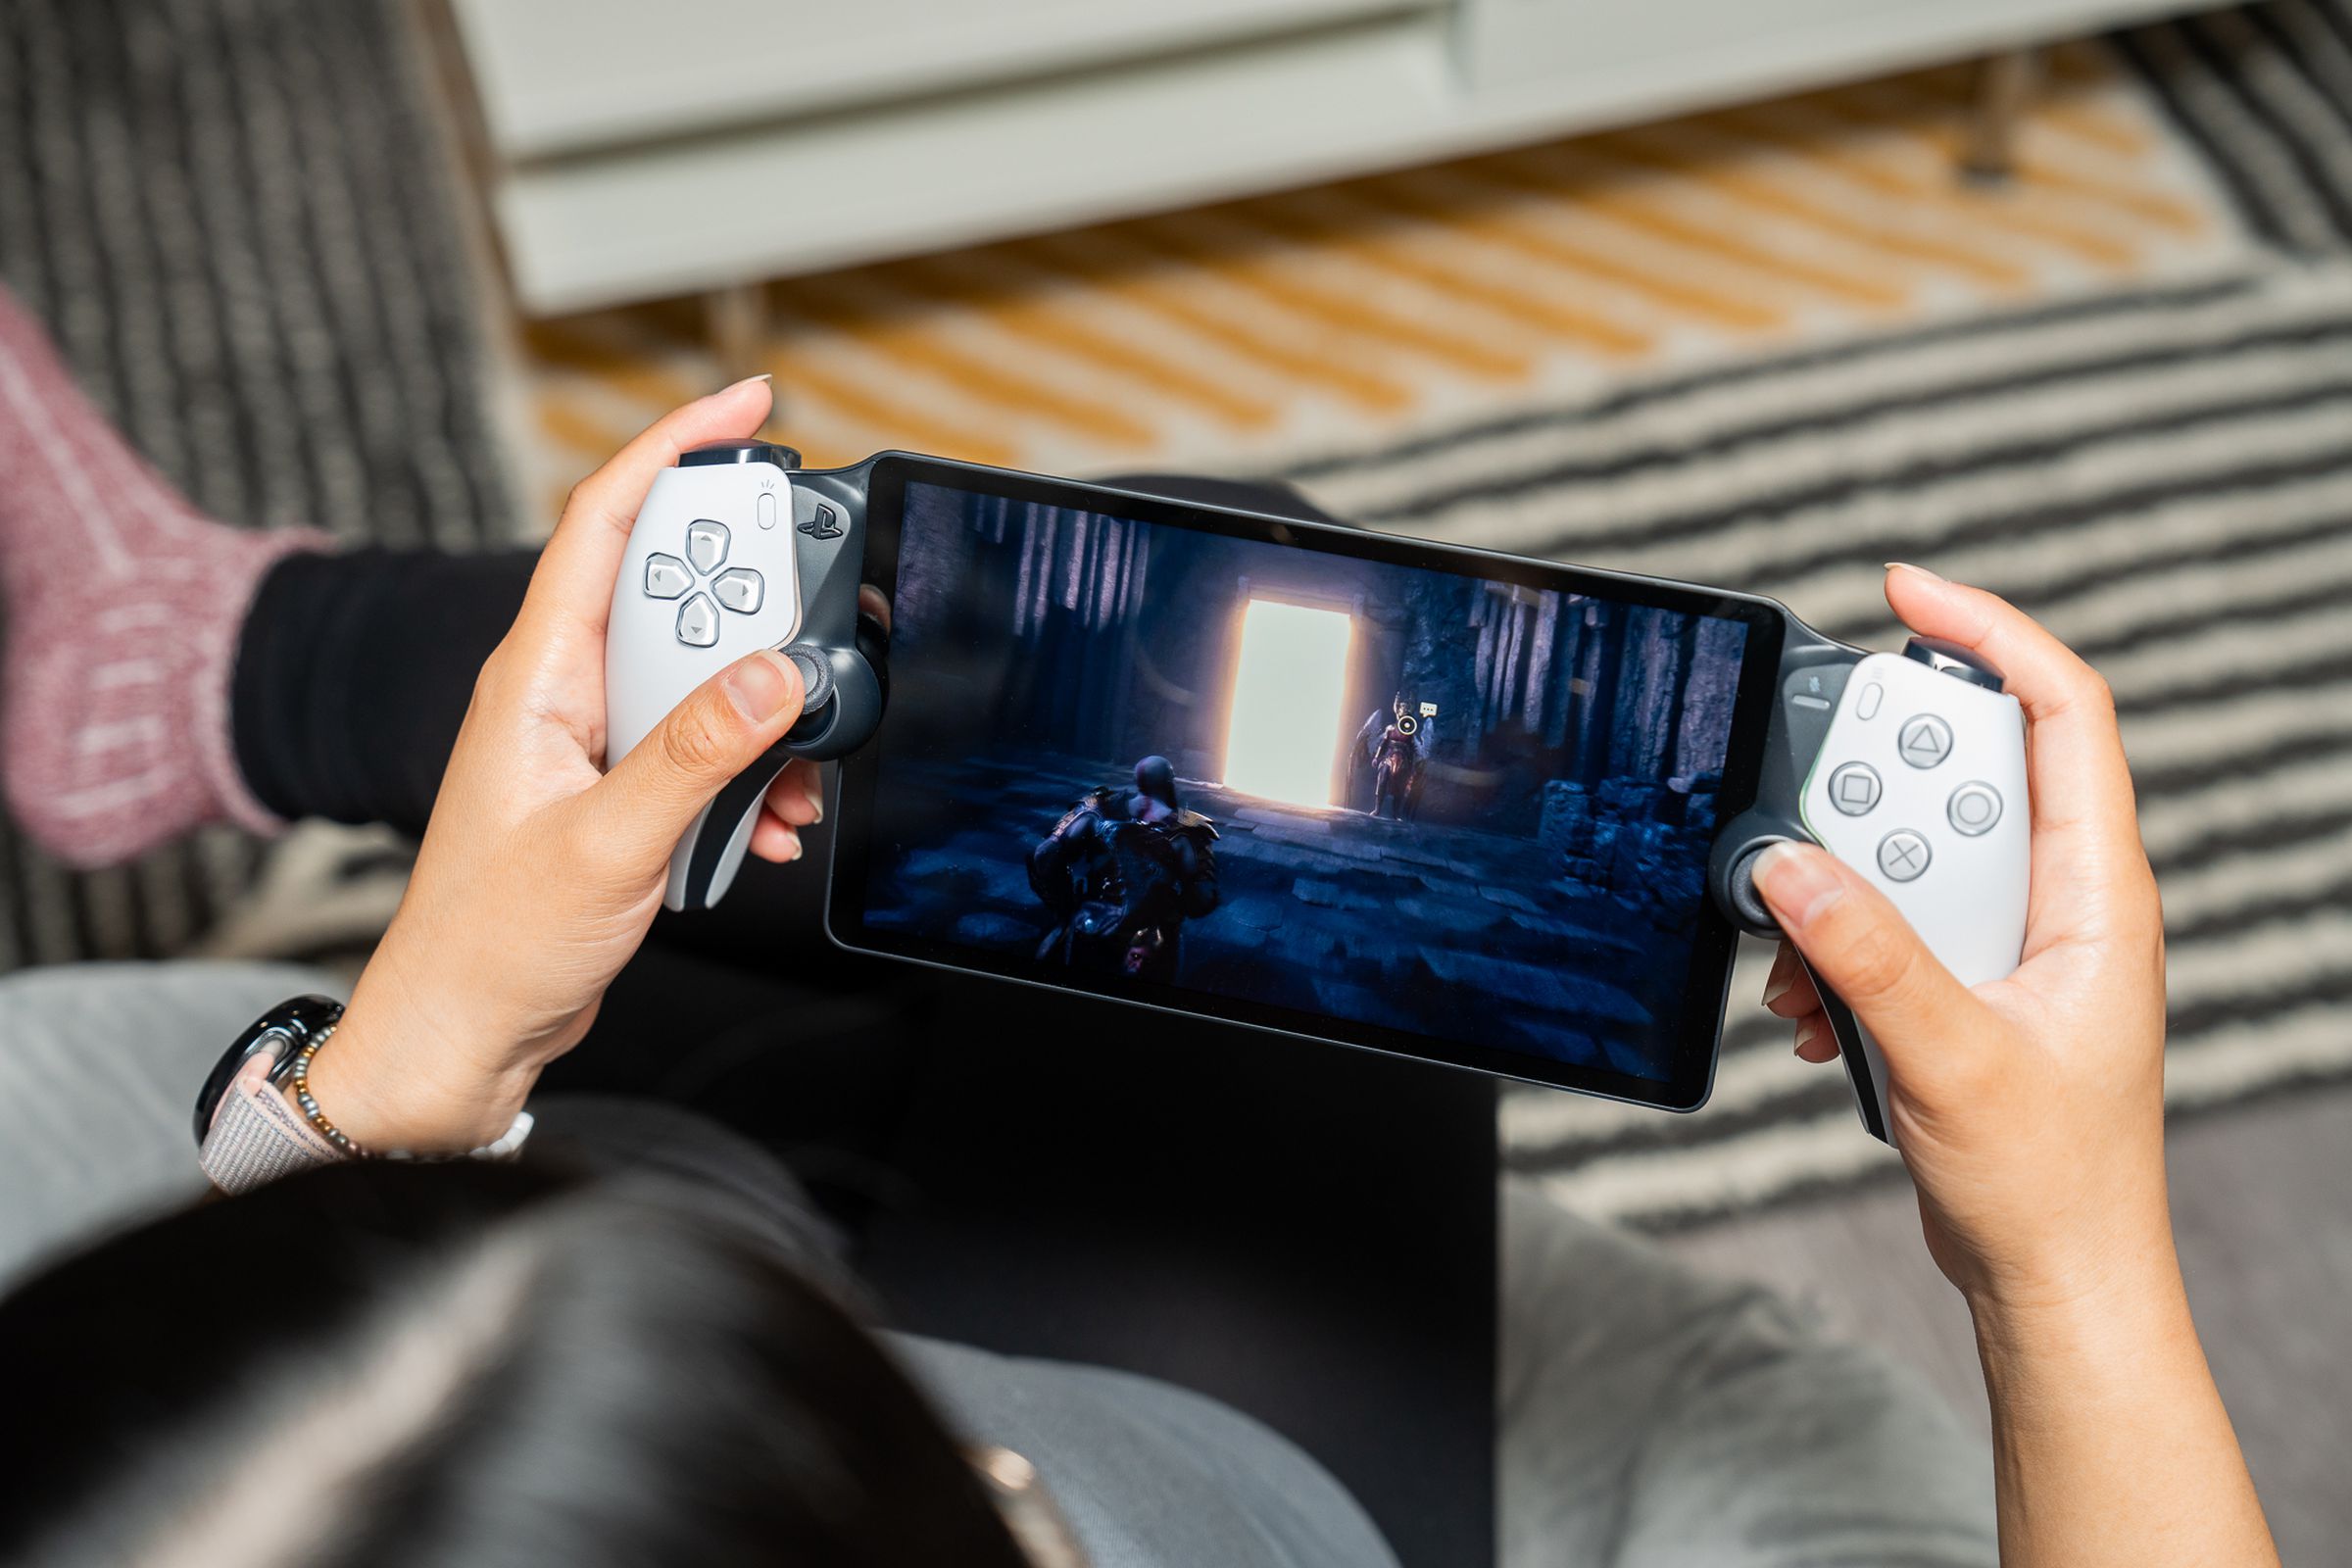 If you can live with the quirks, this is a cozy way to play some PS5 games.